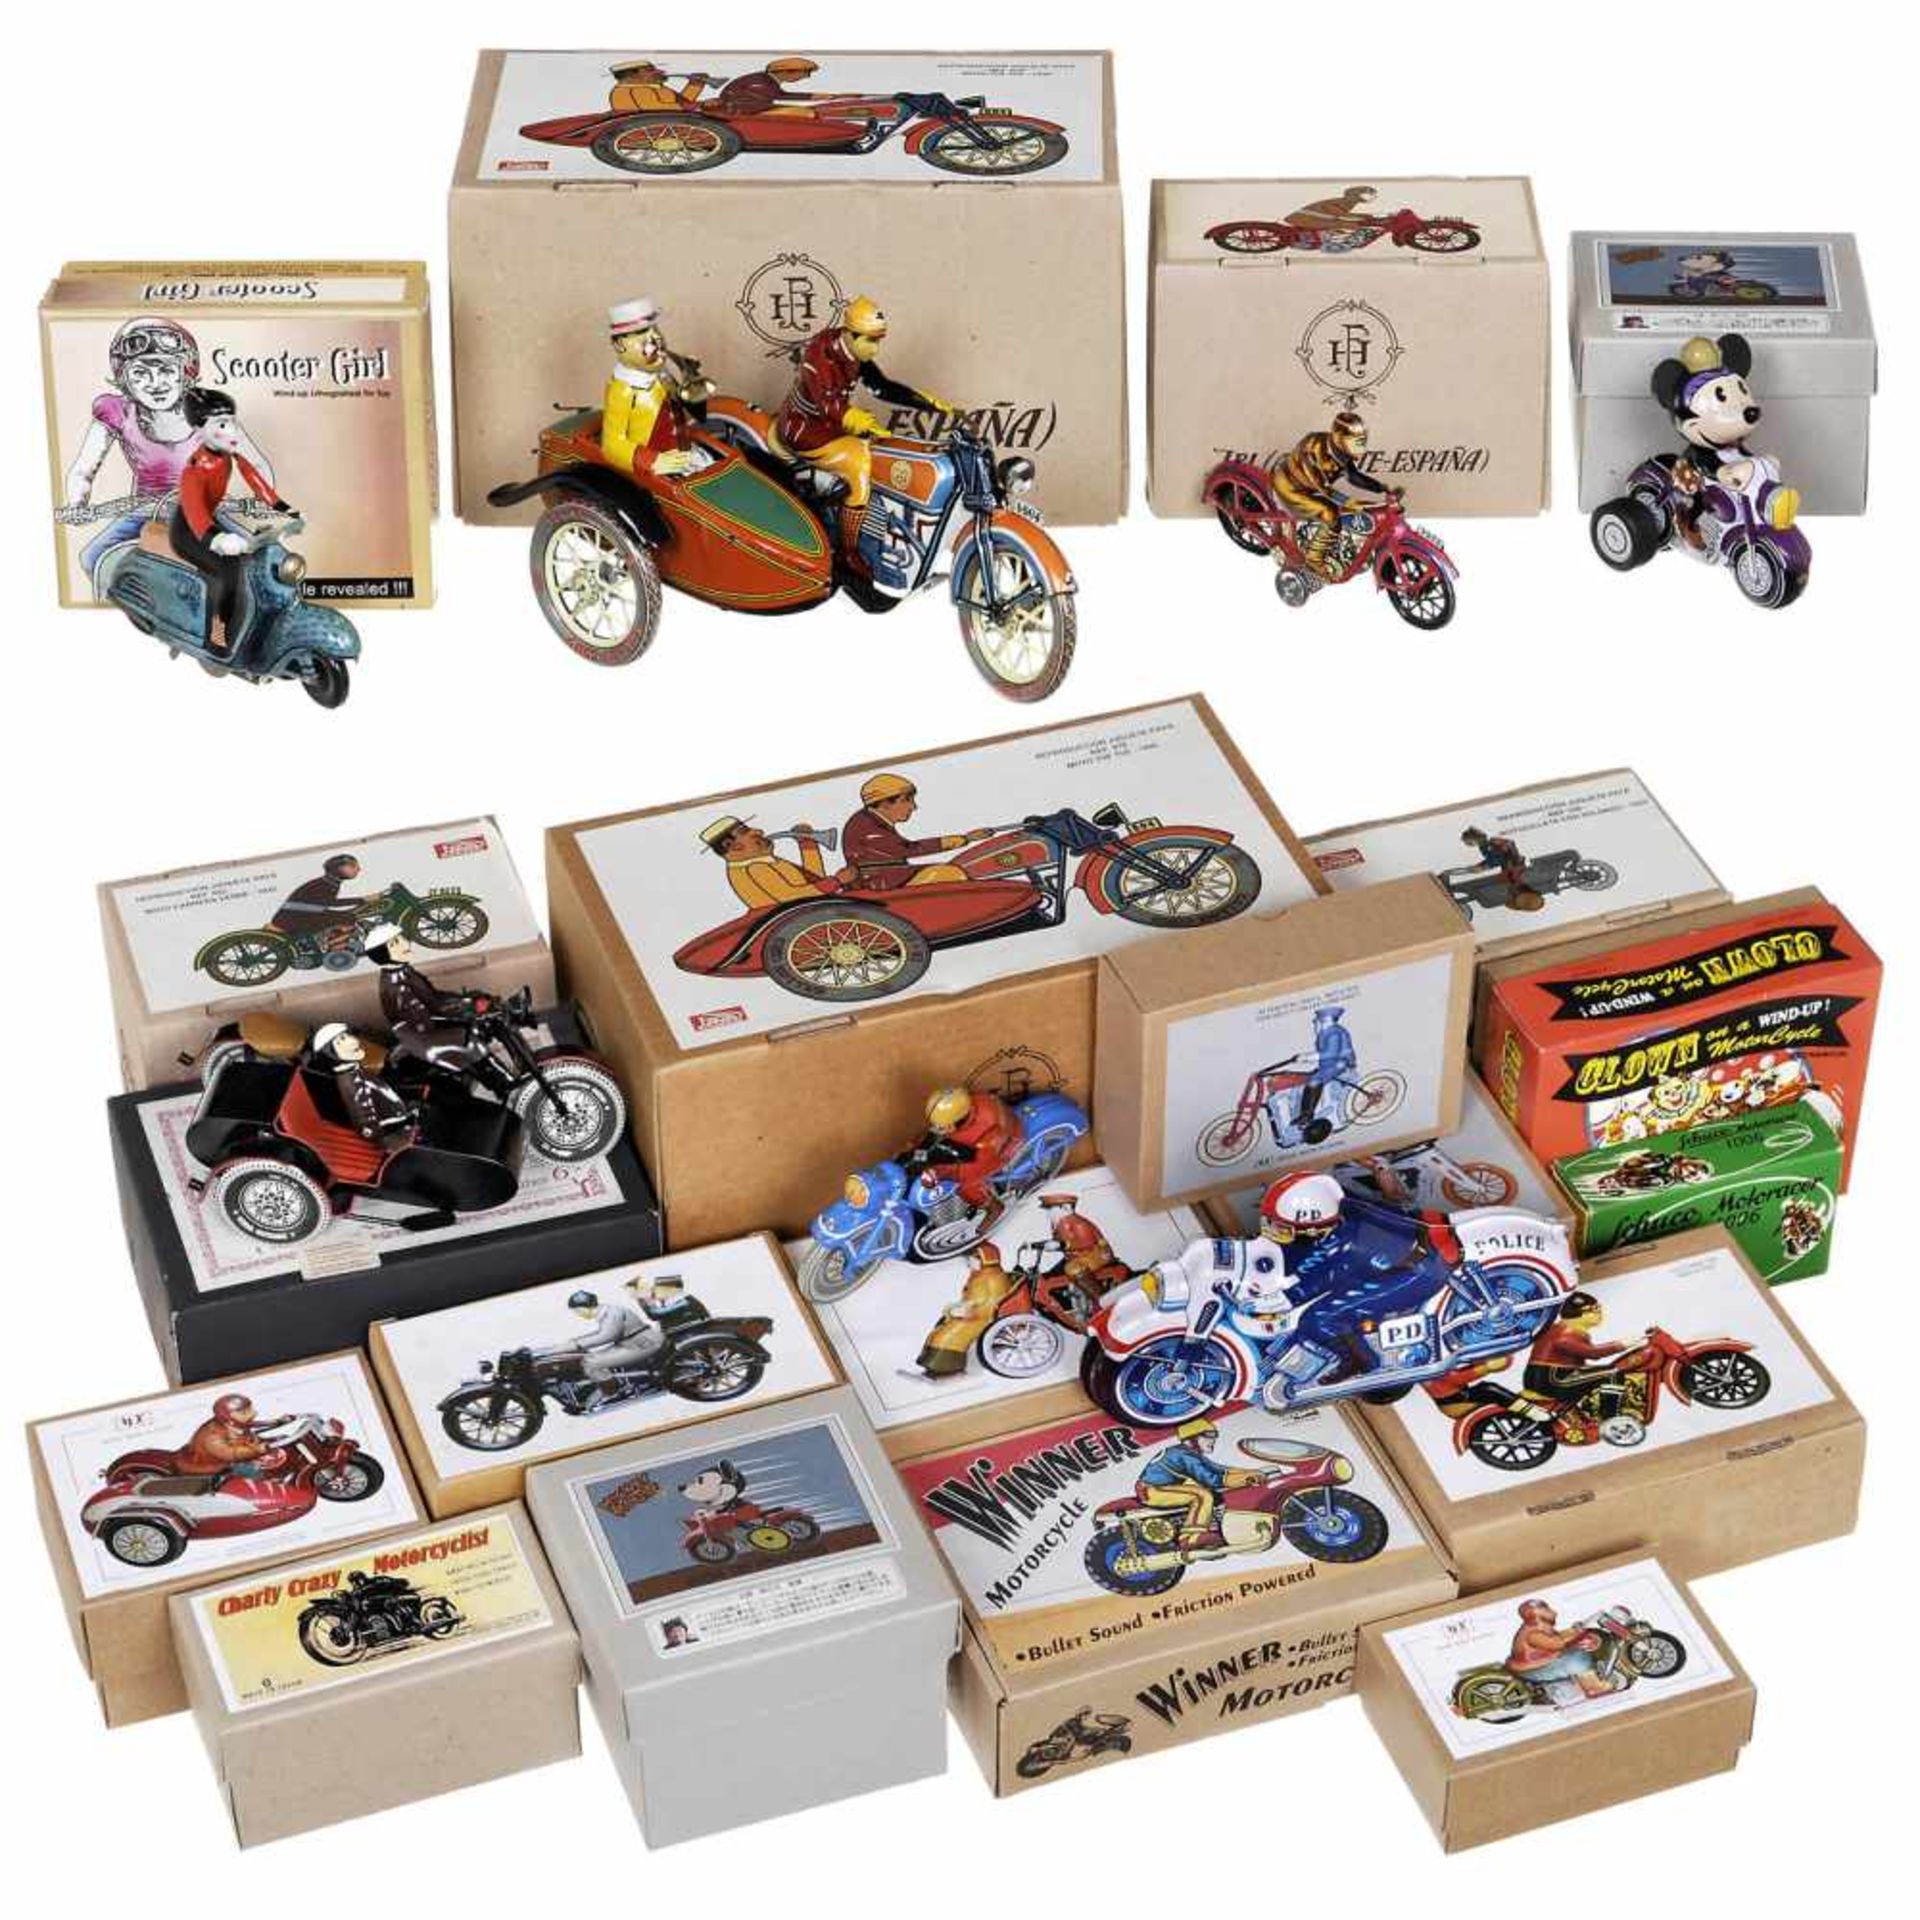 35 Modern Tin-Toy MotorcyclesReproductions and new models, lithographed tin, mint condition, 23 of